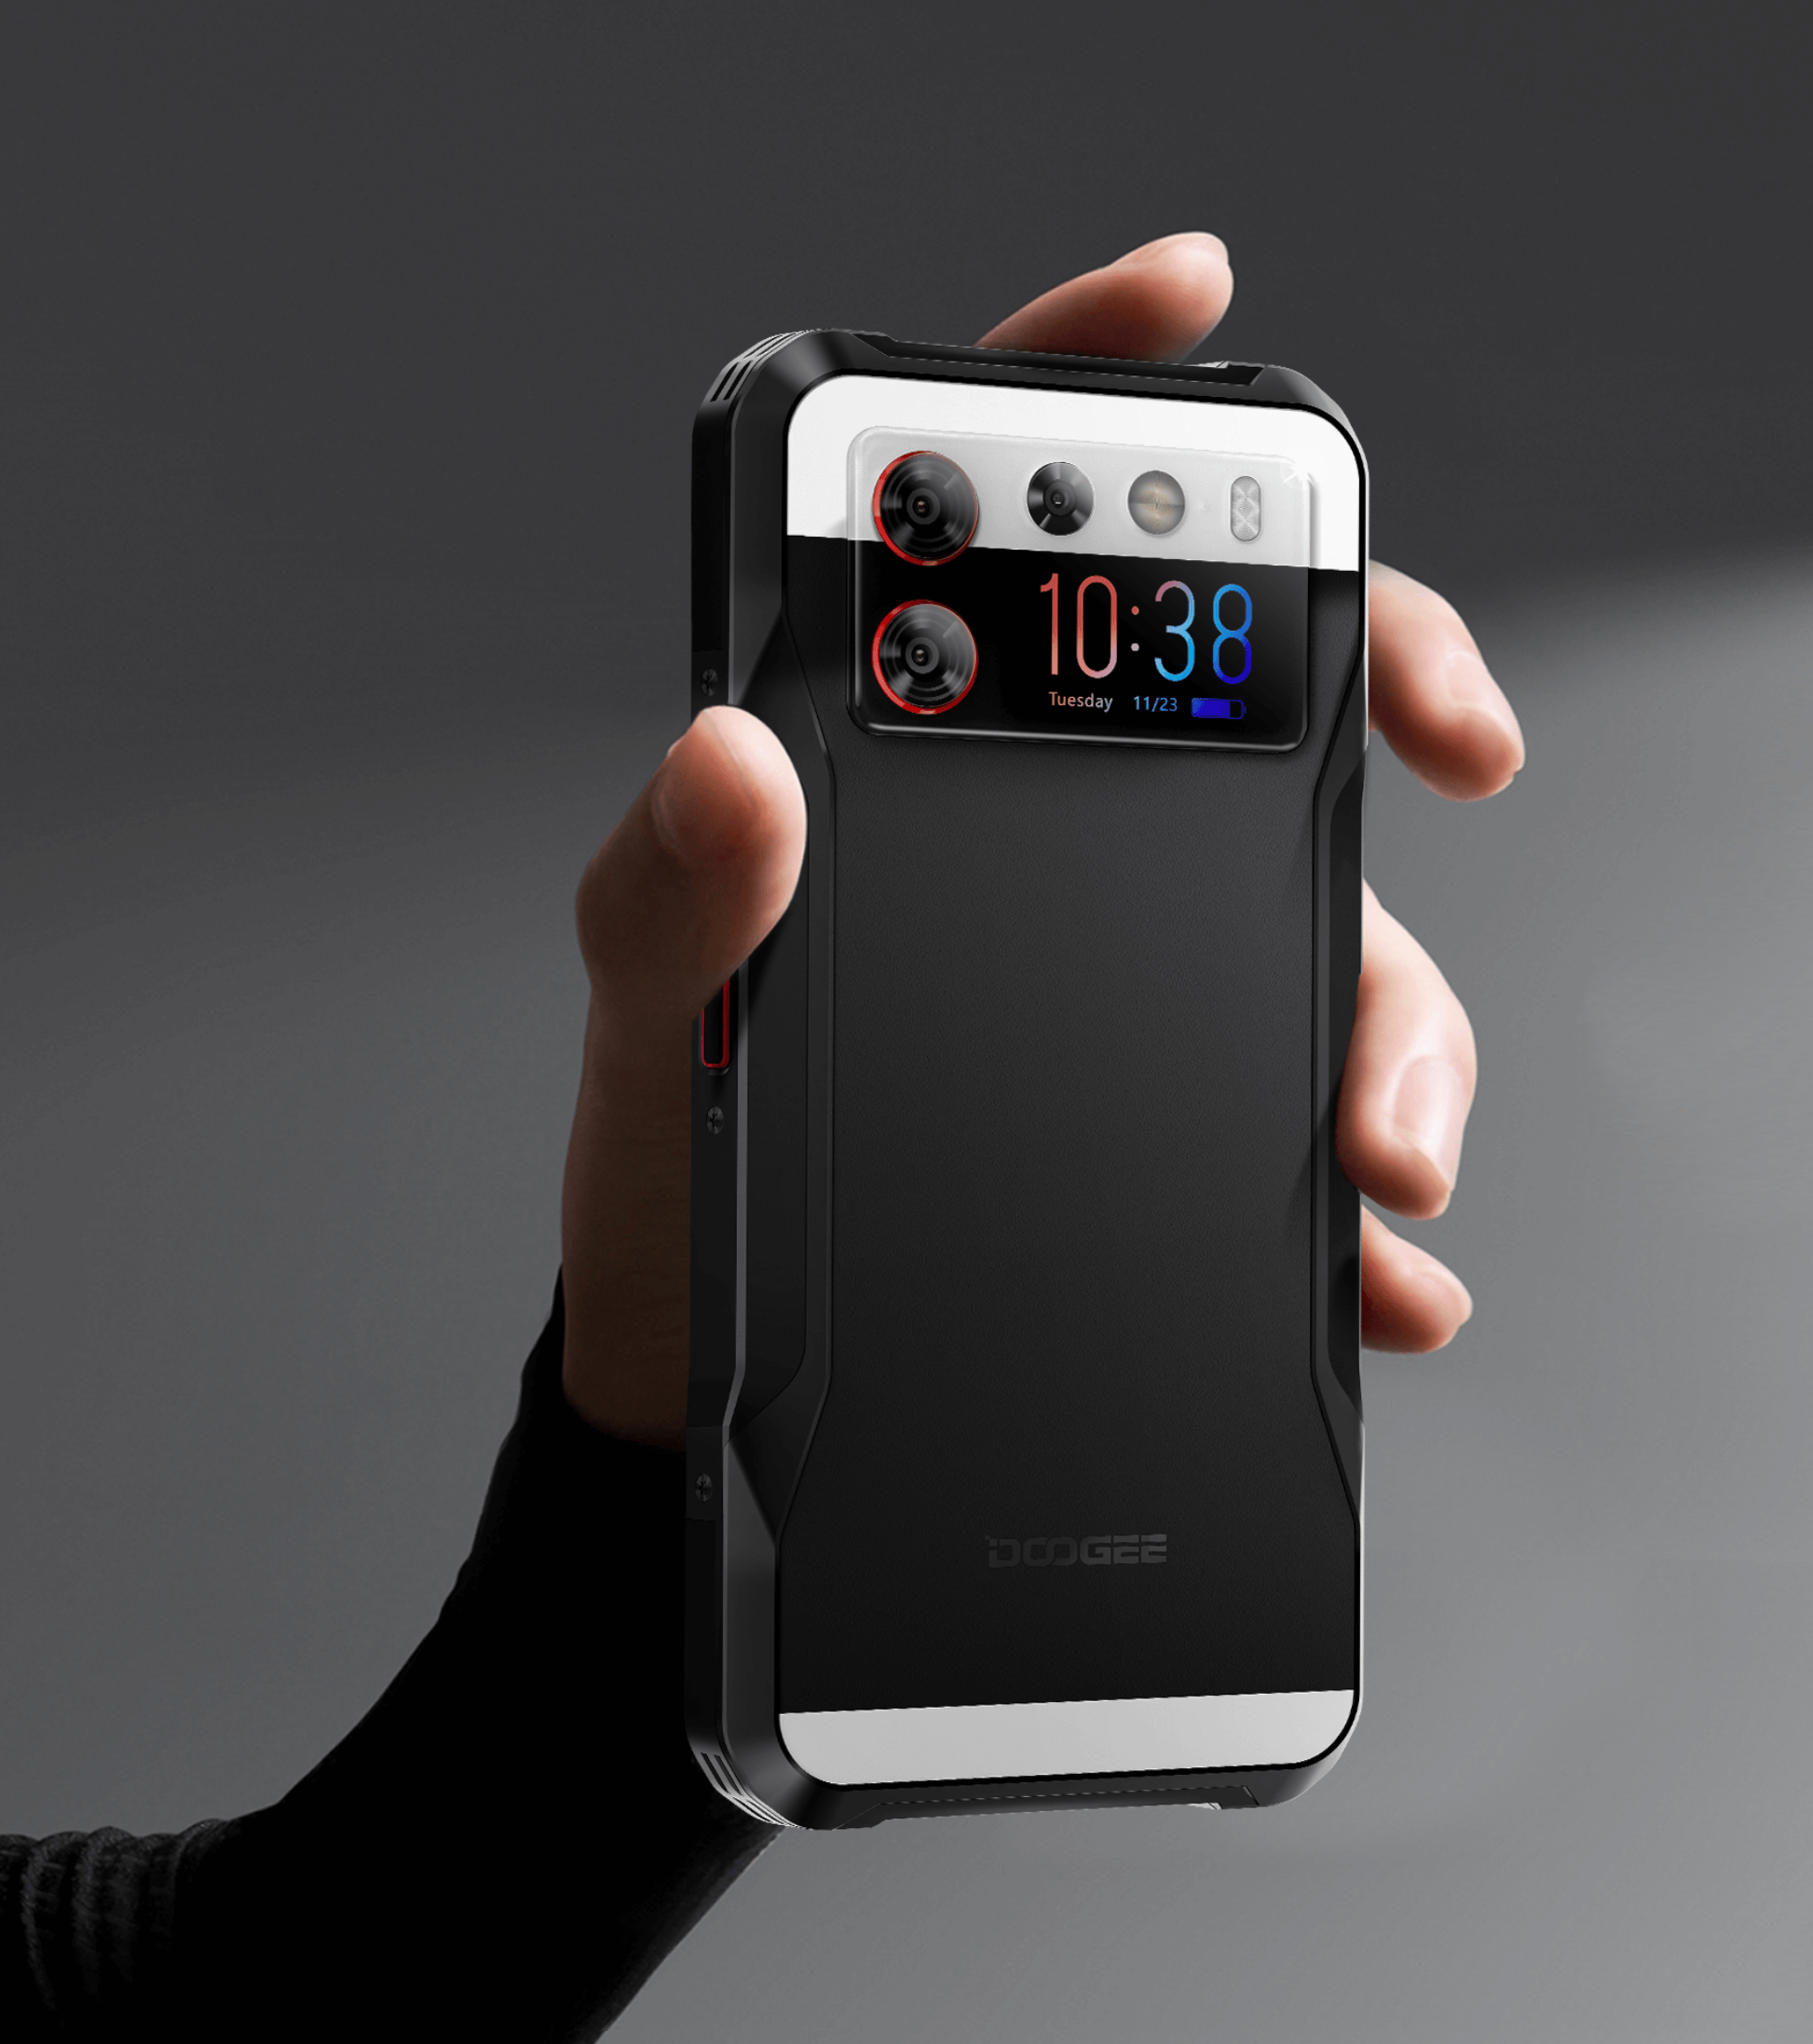 Doogee - Get blown away by the stunning specs and features of the